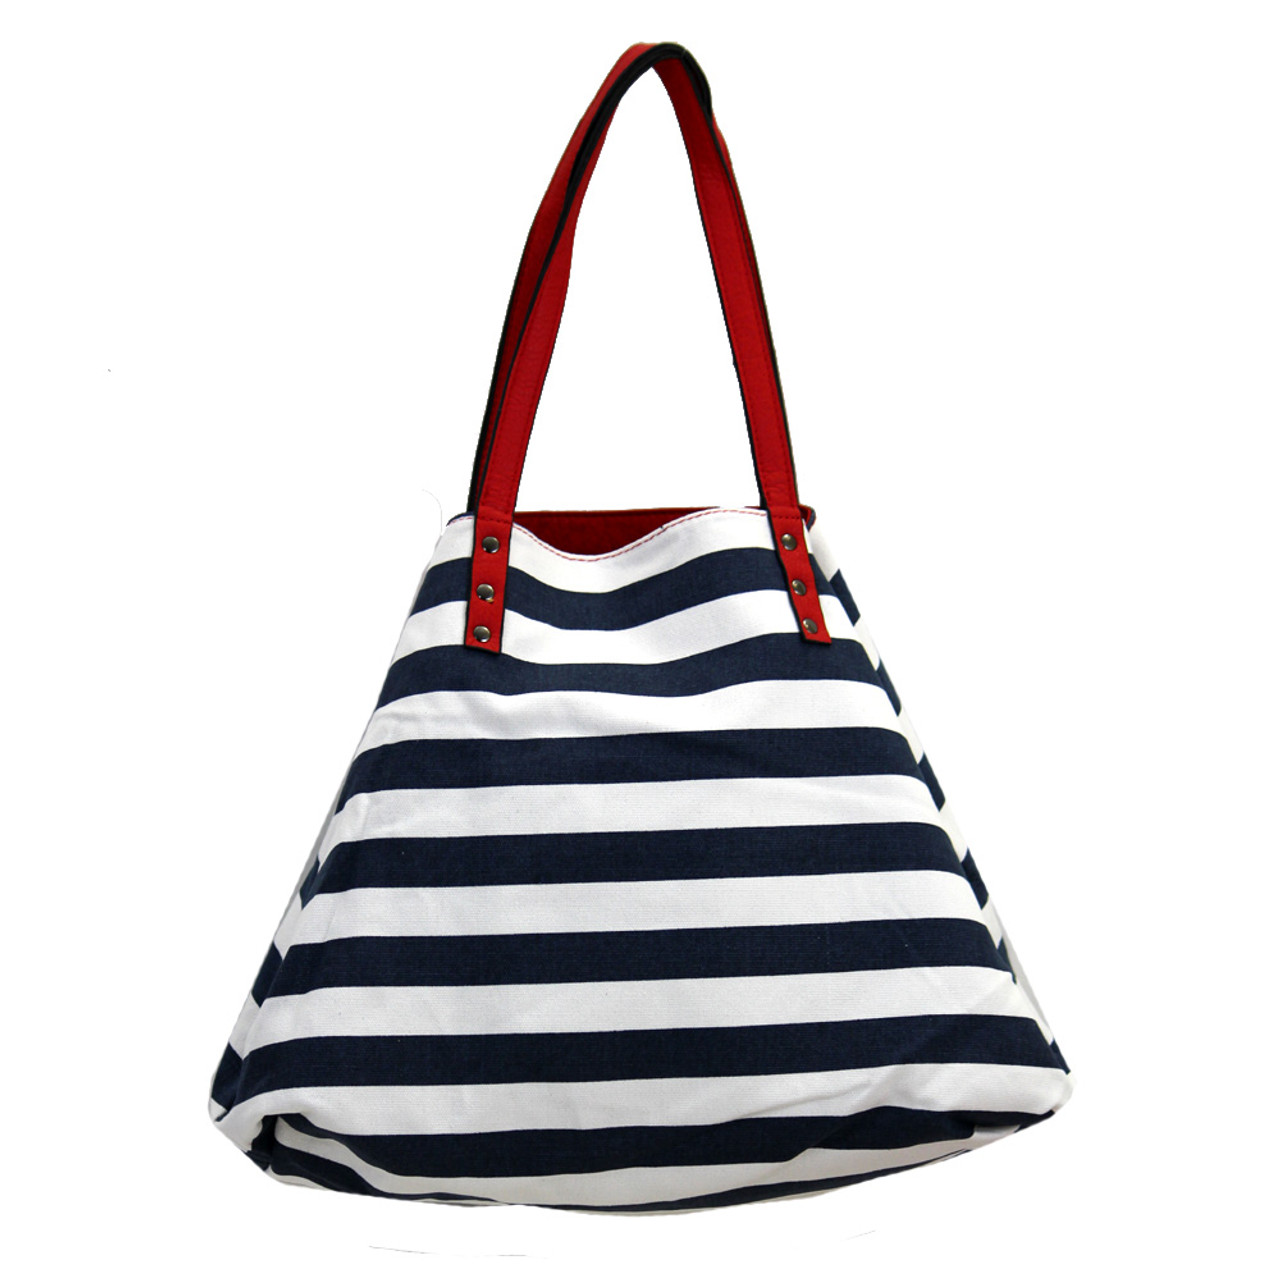 Reversible 3 in 1 Purse Red, Navy Blue and Cream